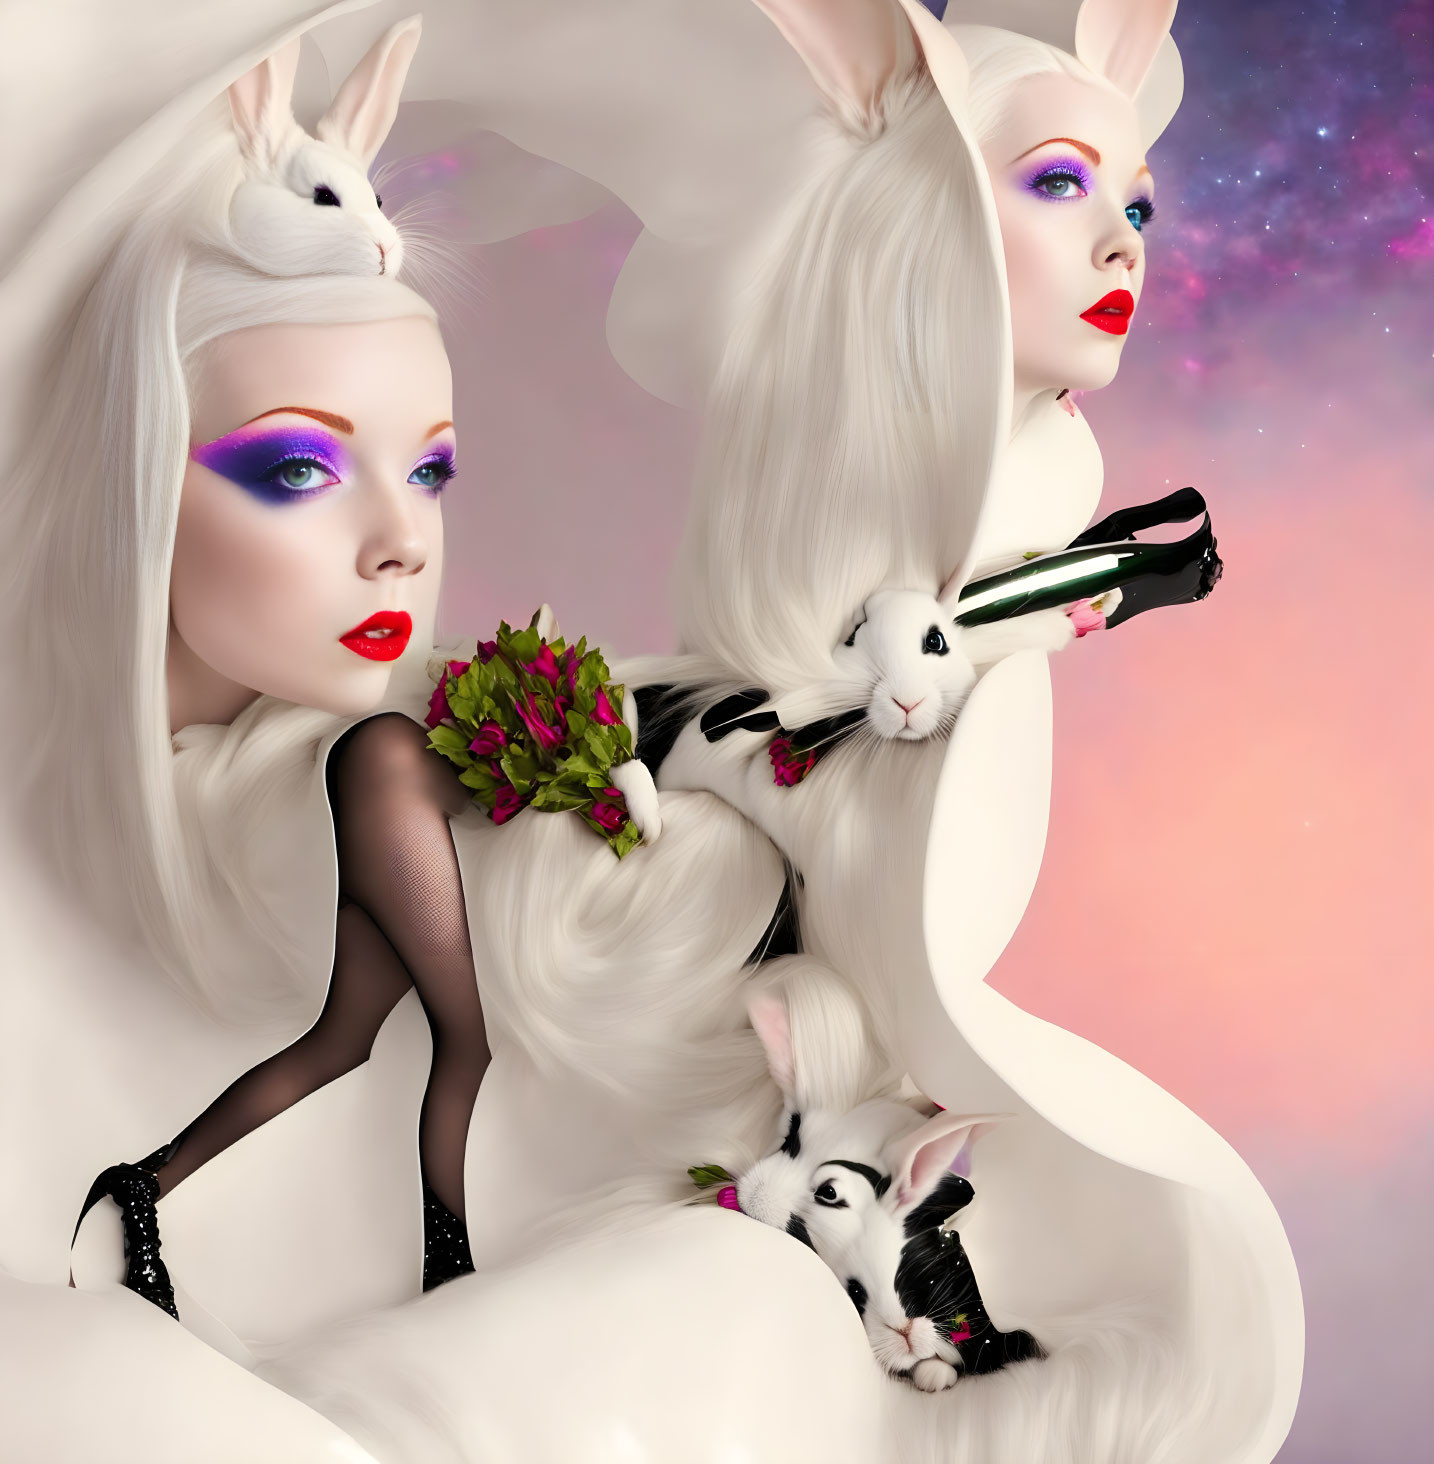 Surreal Artwork: Two Women with Rabbit Features, Cosmic Background